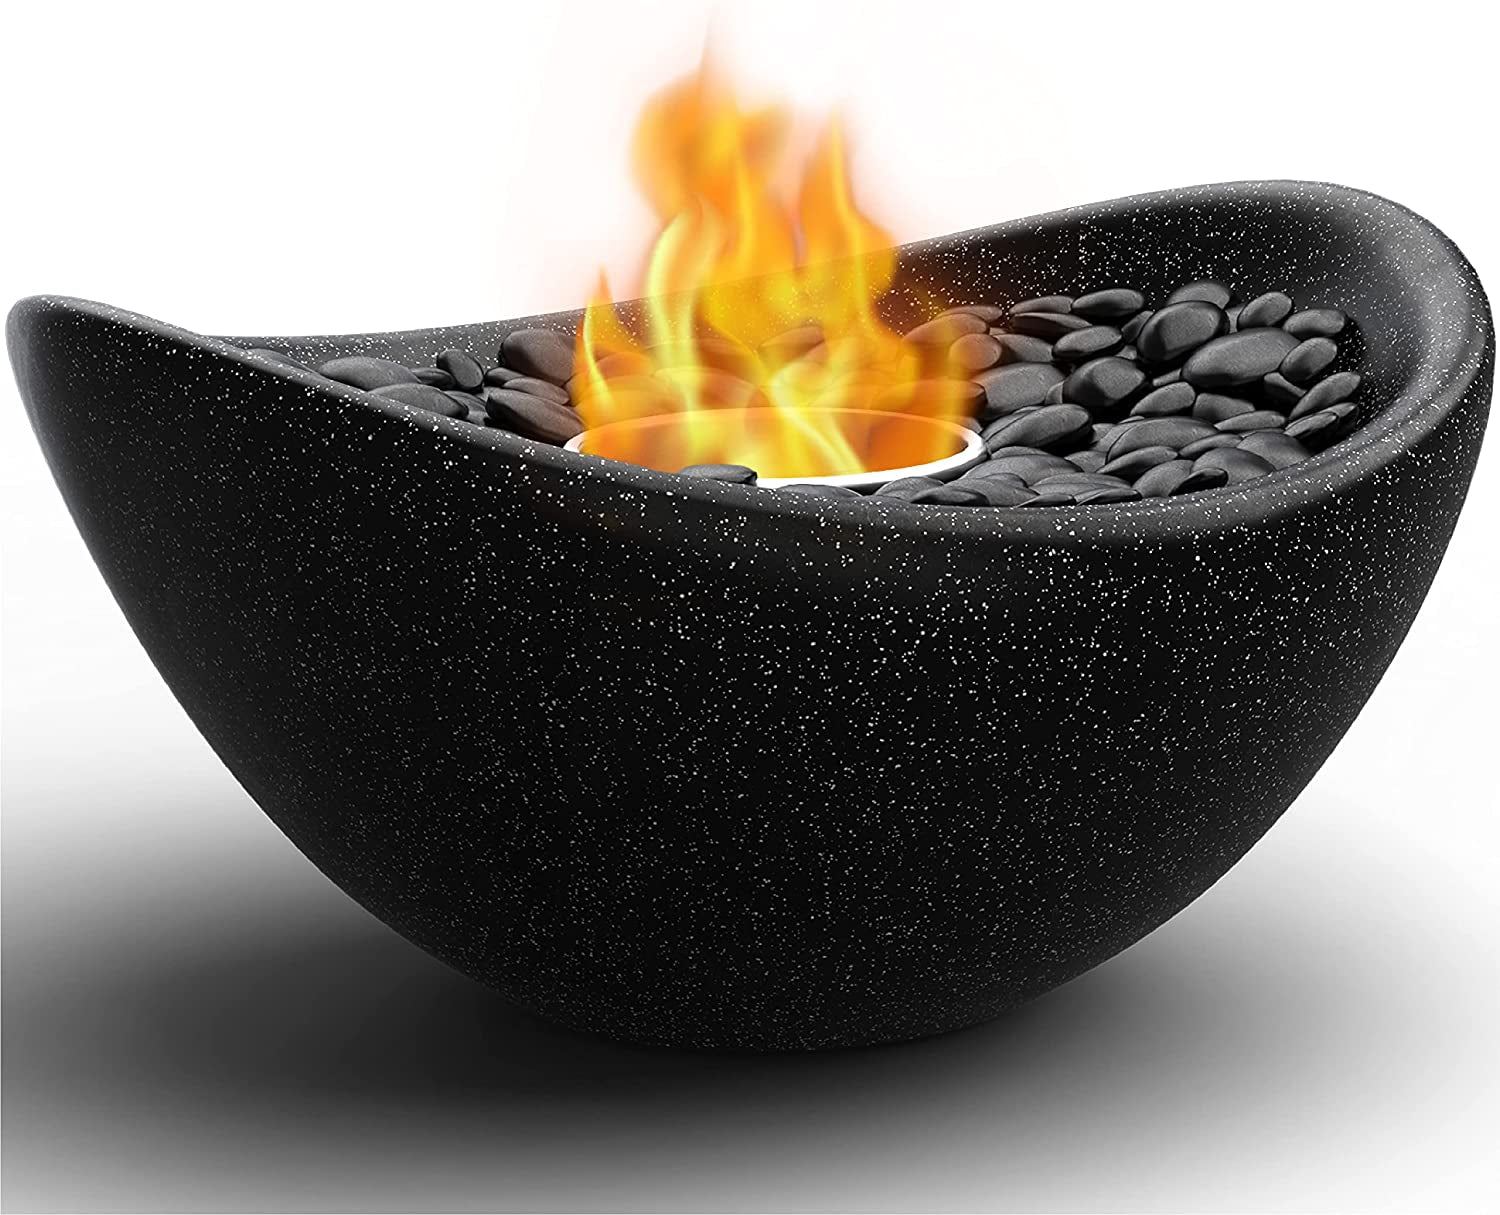 Tabletop Fire Pit for Patio - 11 X 5.3 Inch Indoor Outdoor Table Top Firepit Bowl- Black